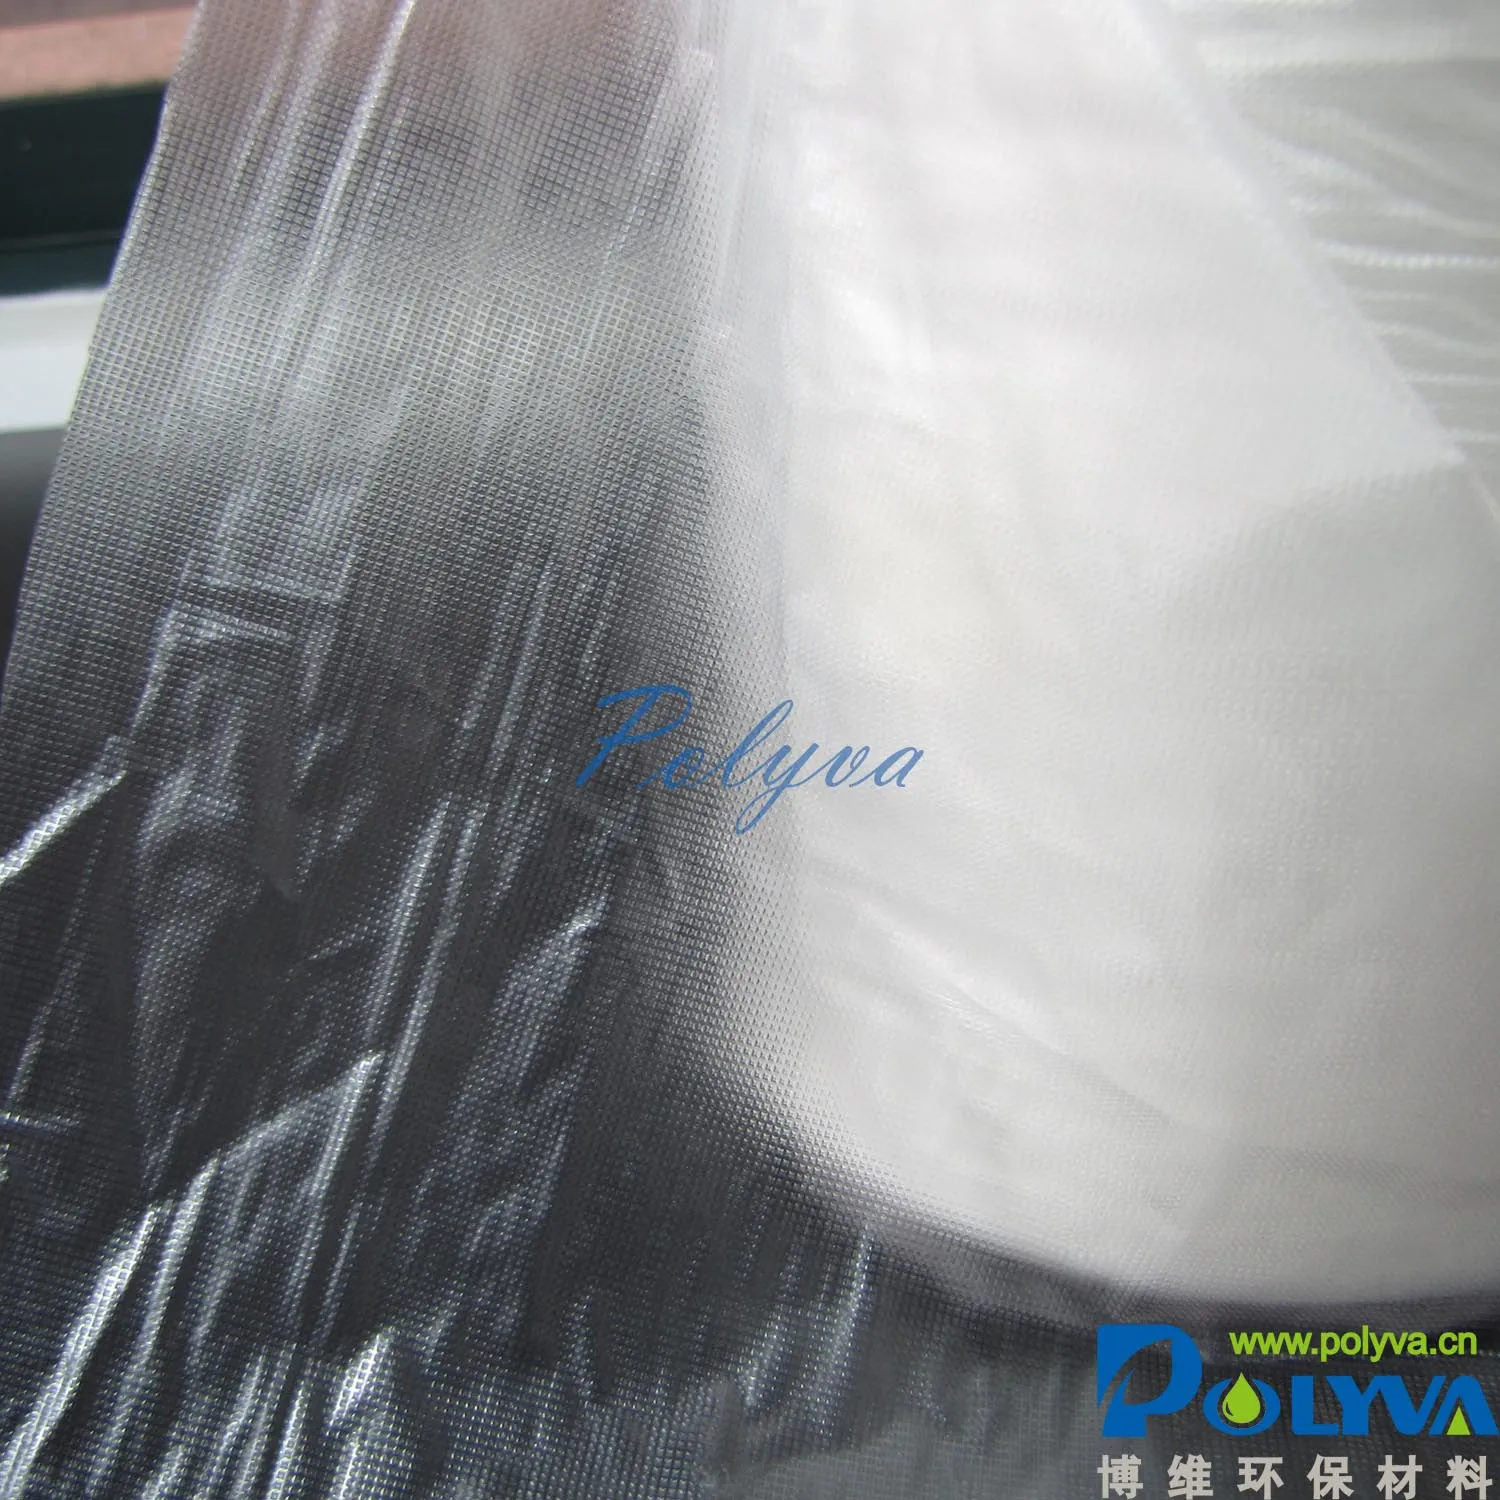 POLYVA pva water soluble film factory price for packaging-6